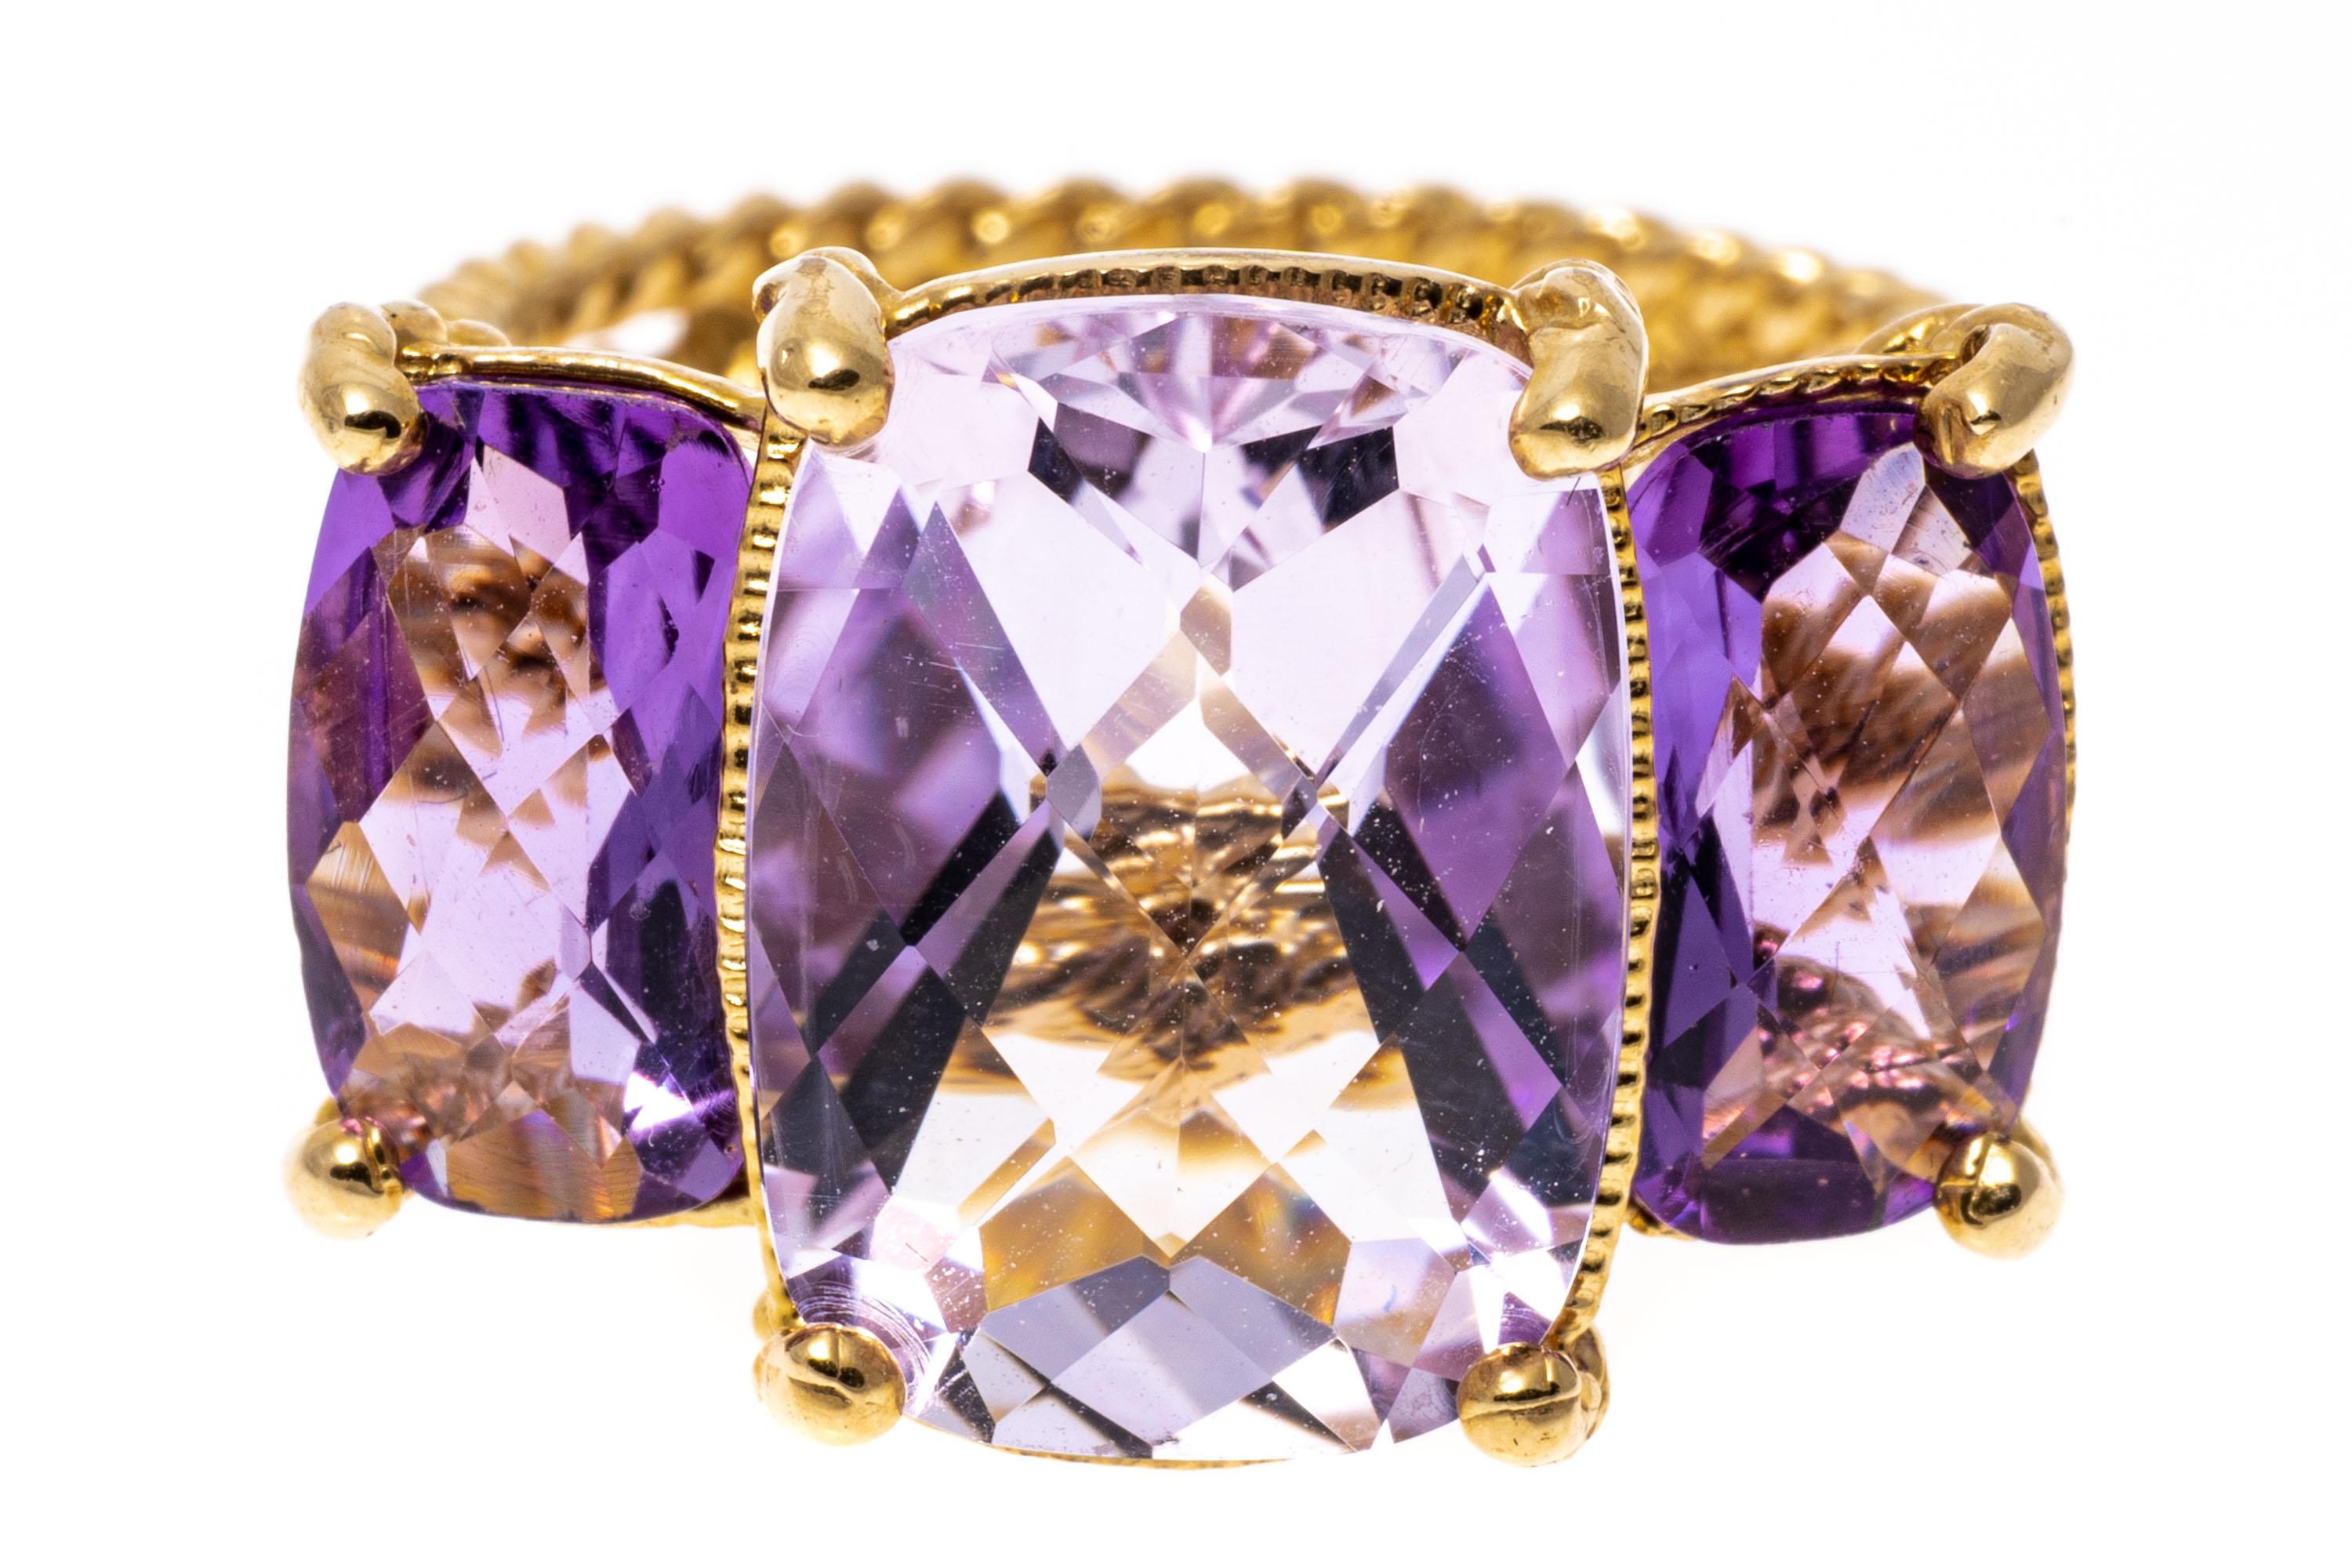 14k yellow gold ring. This pretty ring is a rectangular checkerboard cushion three stone style, with a center, pale purple color amethyst, flanked by two smaller light purple amethysts on the sides, prong set for a total weight of approximately 7.92